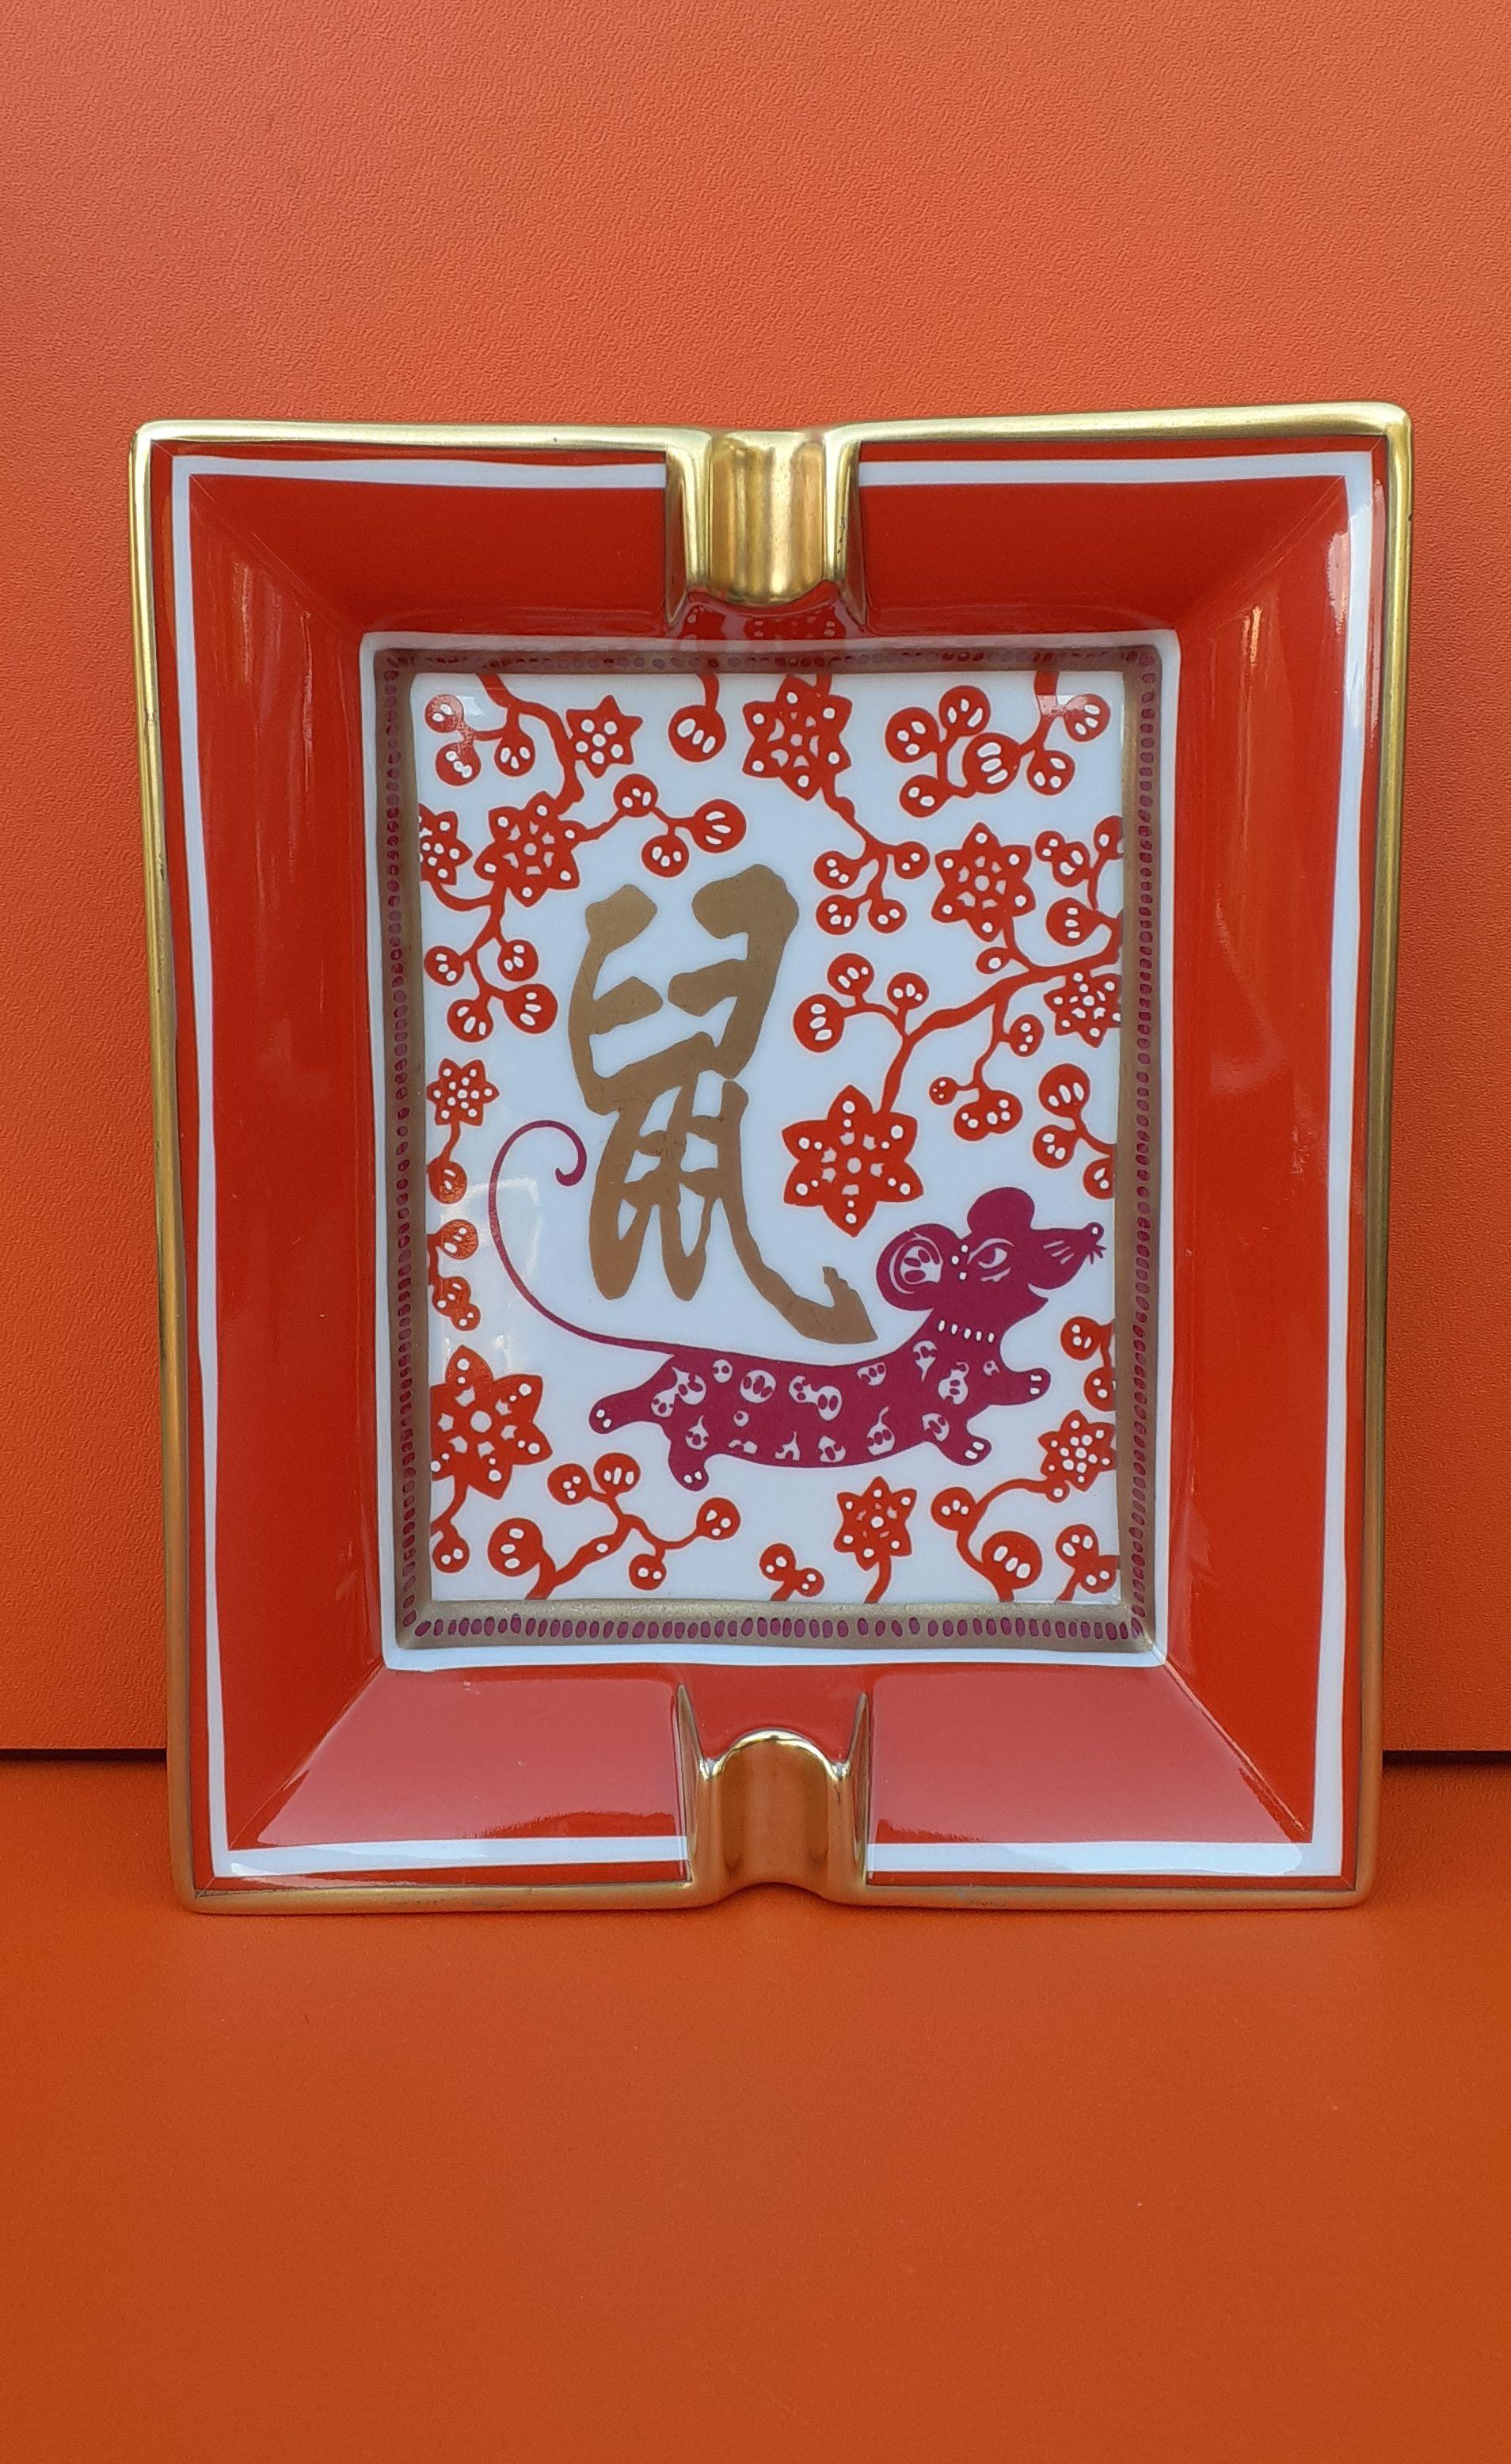 Rare opportunity to get this so beautiful authentic Hermès Ashtray

Print: rat, flowers and ideogram

Made in France

Made of Porcelain

Colorways: Orange, Purple, White, Golden

